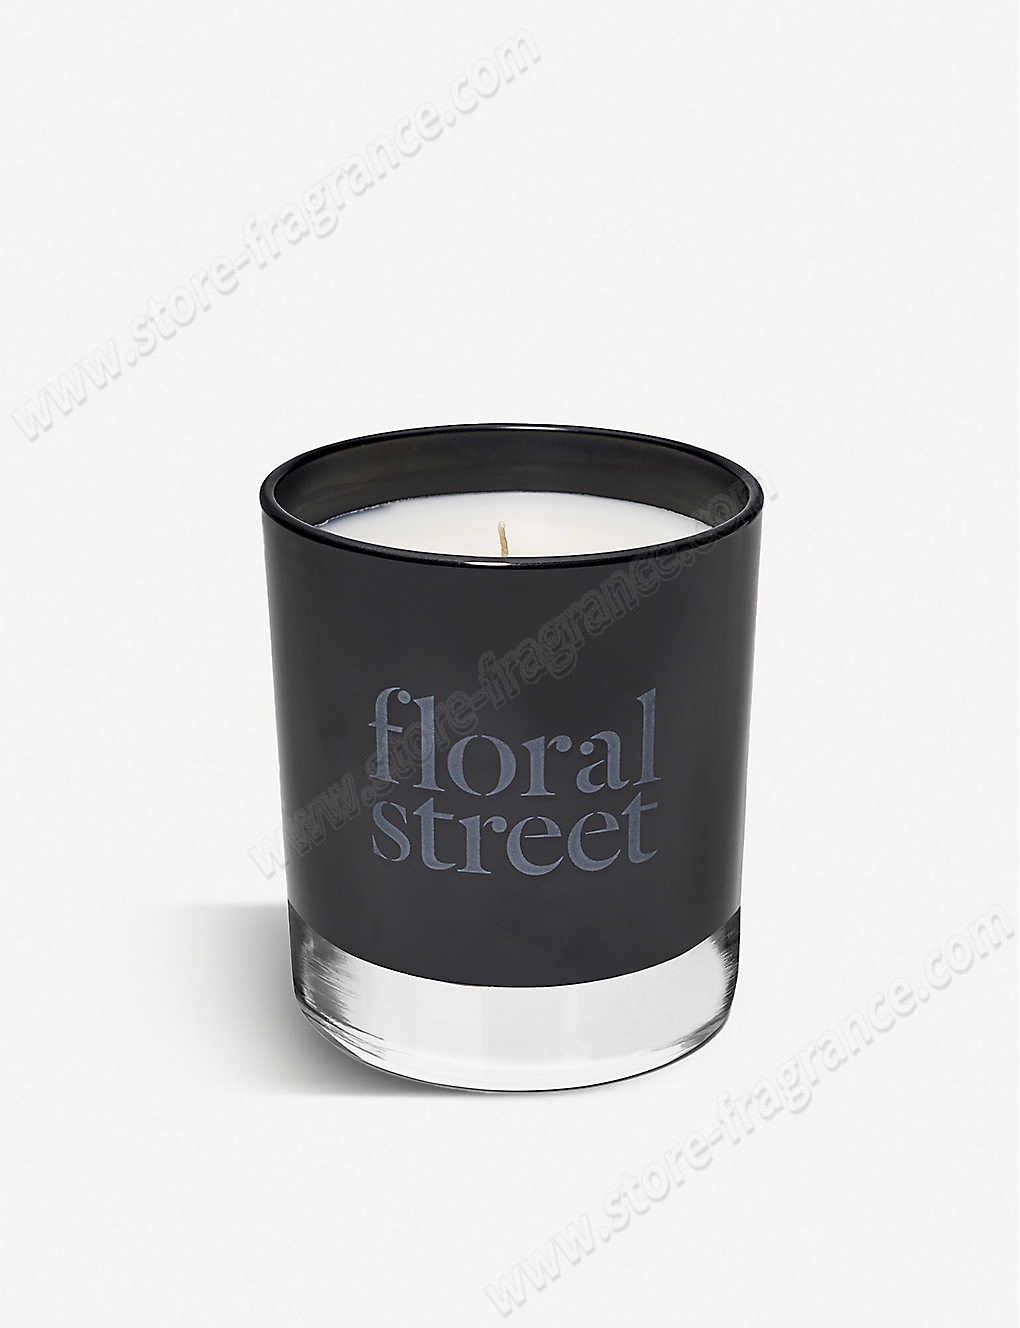 FLORAL STREET/Fireplace scented candle 200g ✿ Discount Store - FLORAL STREET/Fireplace scented candle 200g ✿ Discount Store